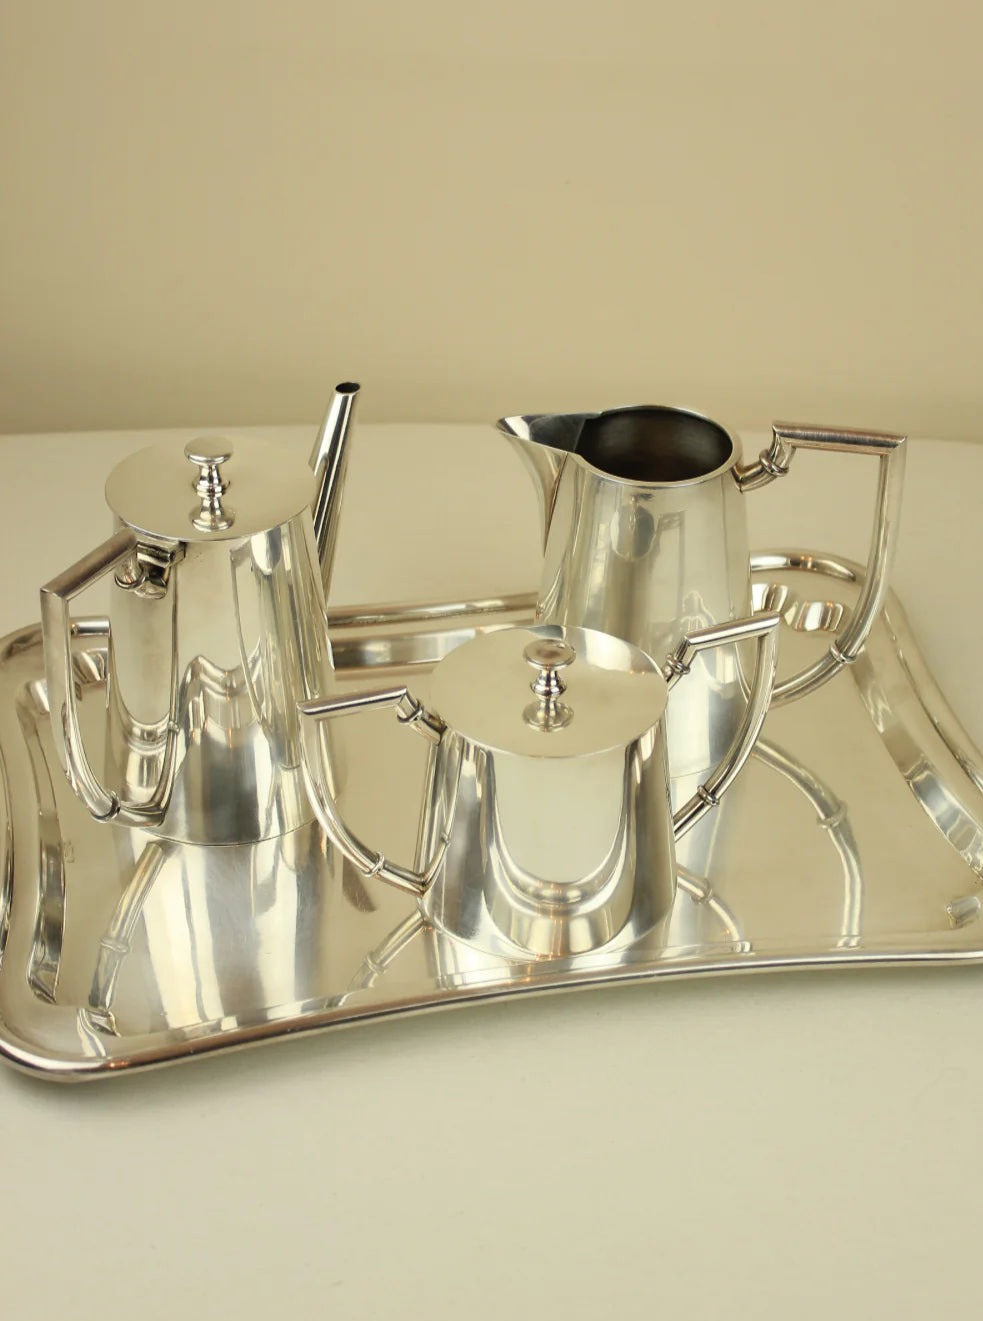 A polished silver Boga Avante Shop Art Deco Tea/Coffee Service on a tray, including a teapot, sugar bowl, and creamer, all with lids and classic designs, displayed on a beige background.